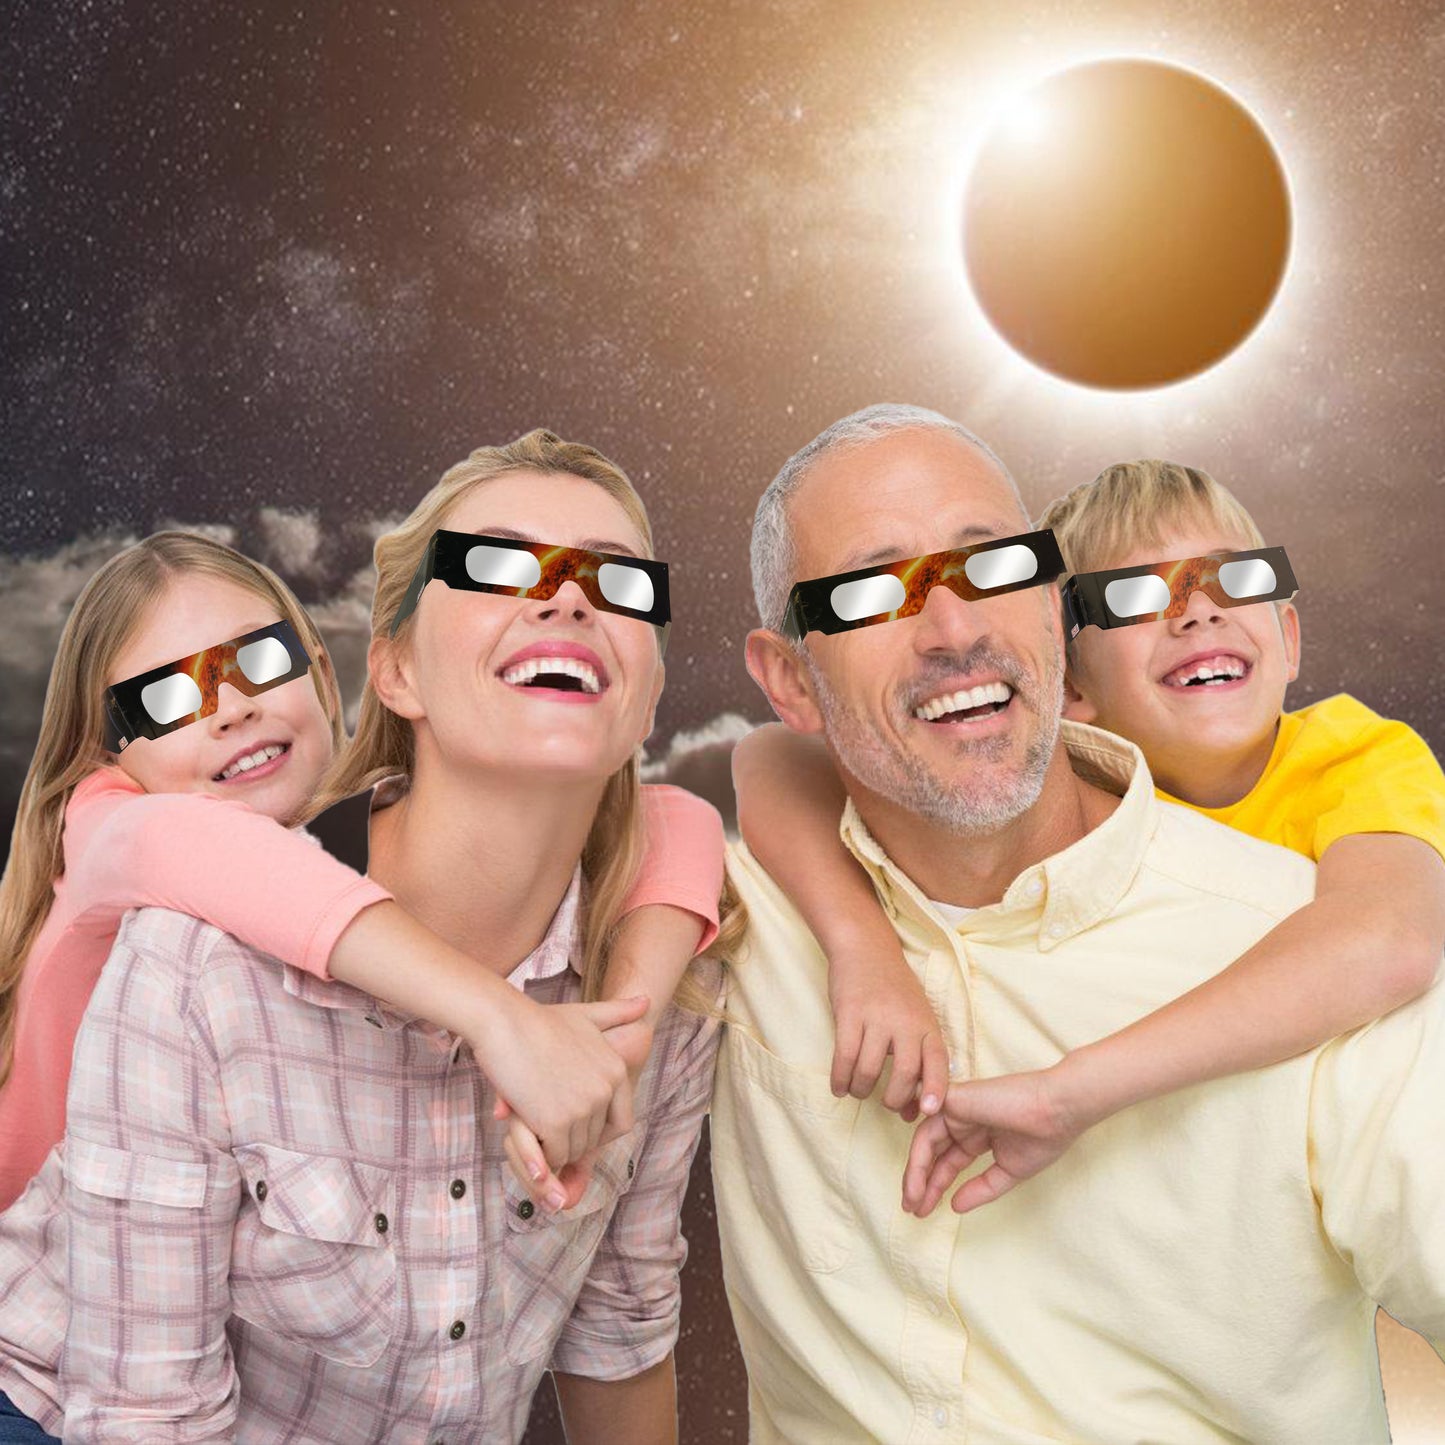 Biniki Solar Eclipse Glasses 2024 - CE & ISO Certified Safe Shades for Direct Sun Viewing(12 Packs)